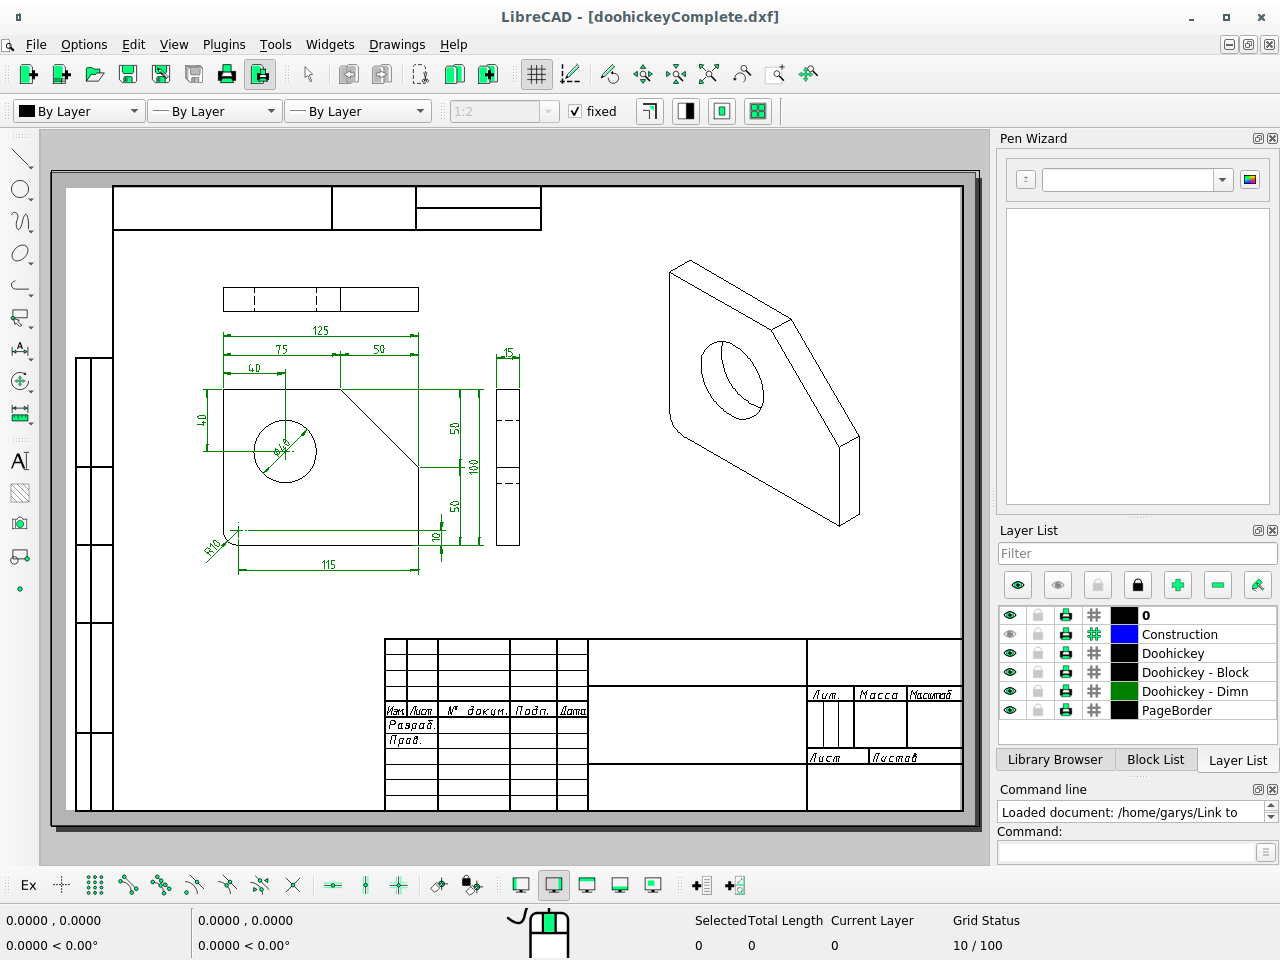 Libre Cad for Windows - 2D CAD Computer Aided Design Full Software Package on USB